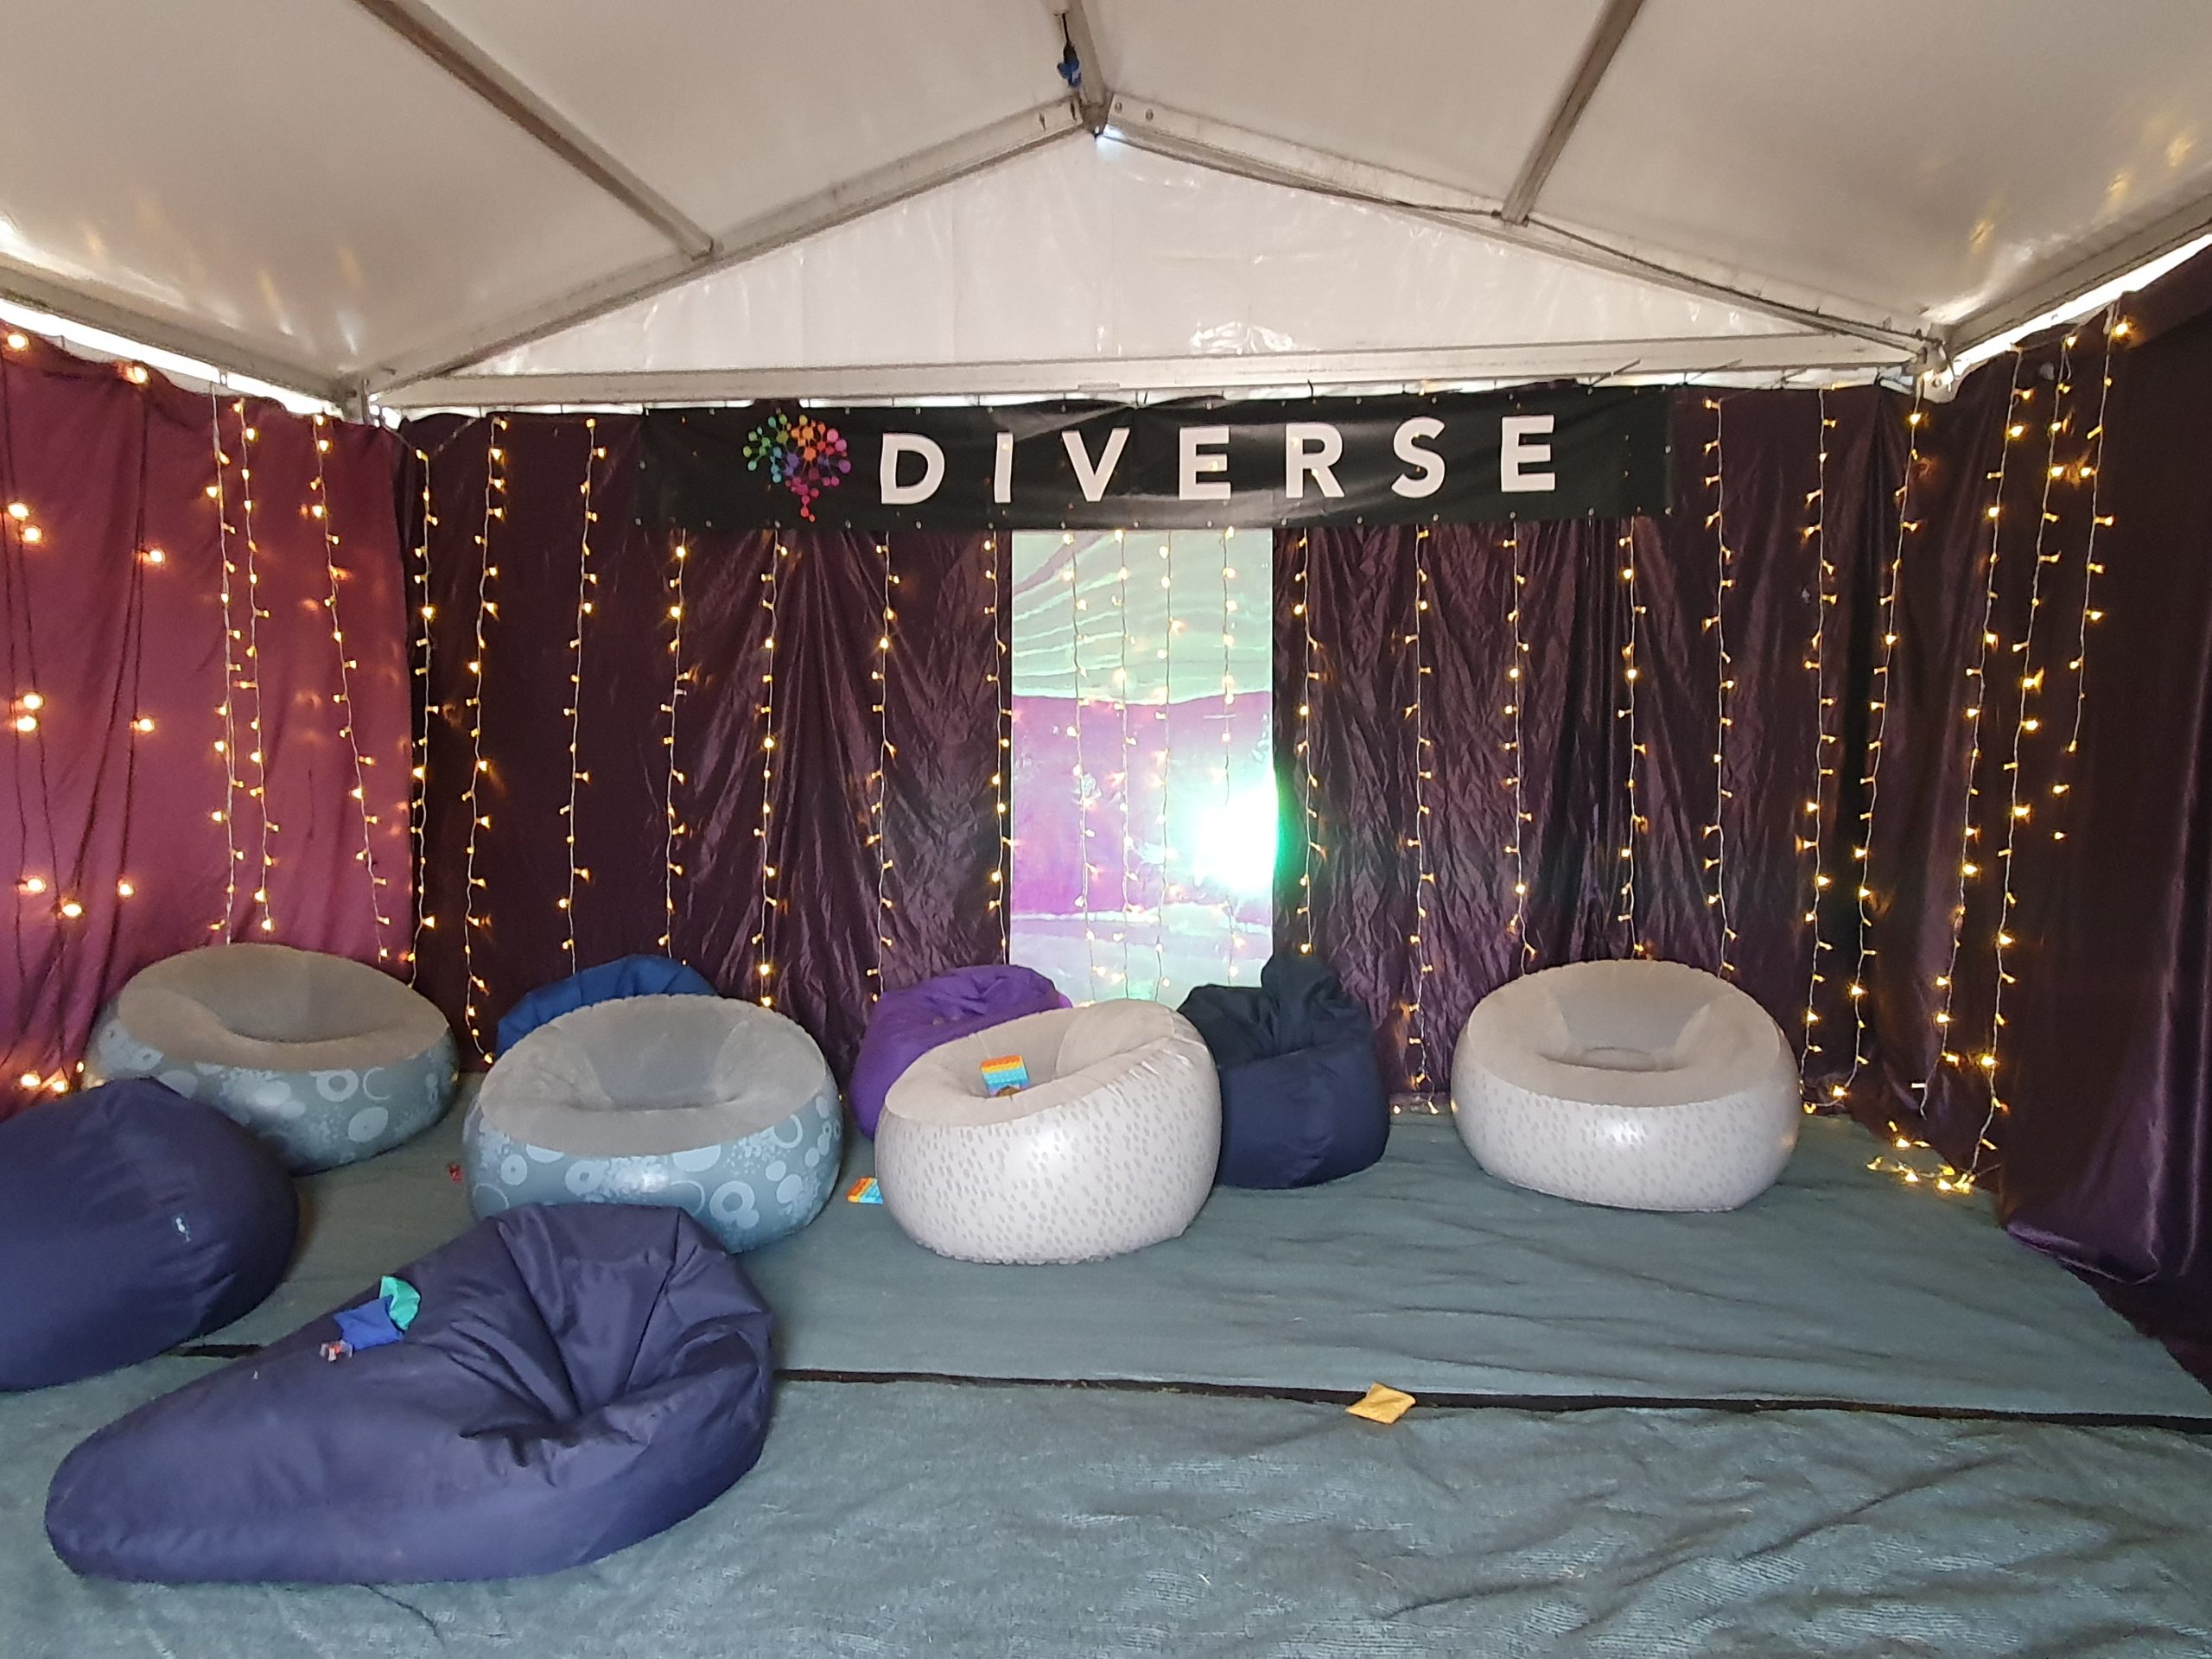 The Inside of the sensory calm space. 10 large beanbags accompanied by soft fairy lights hanging from the walls 